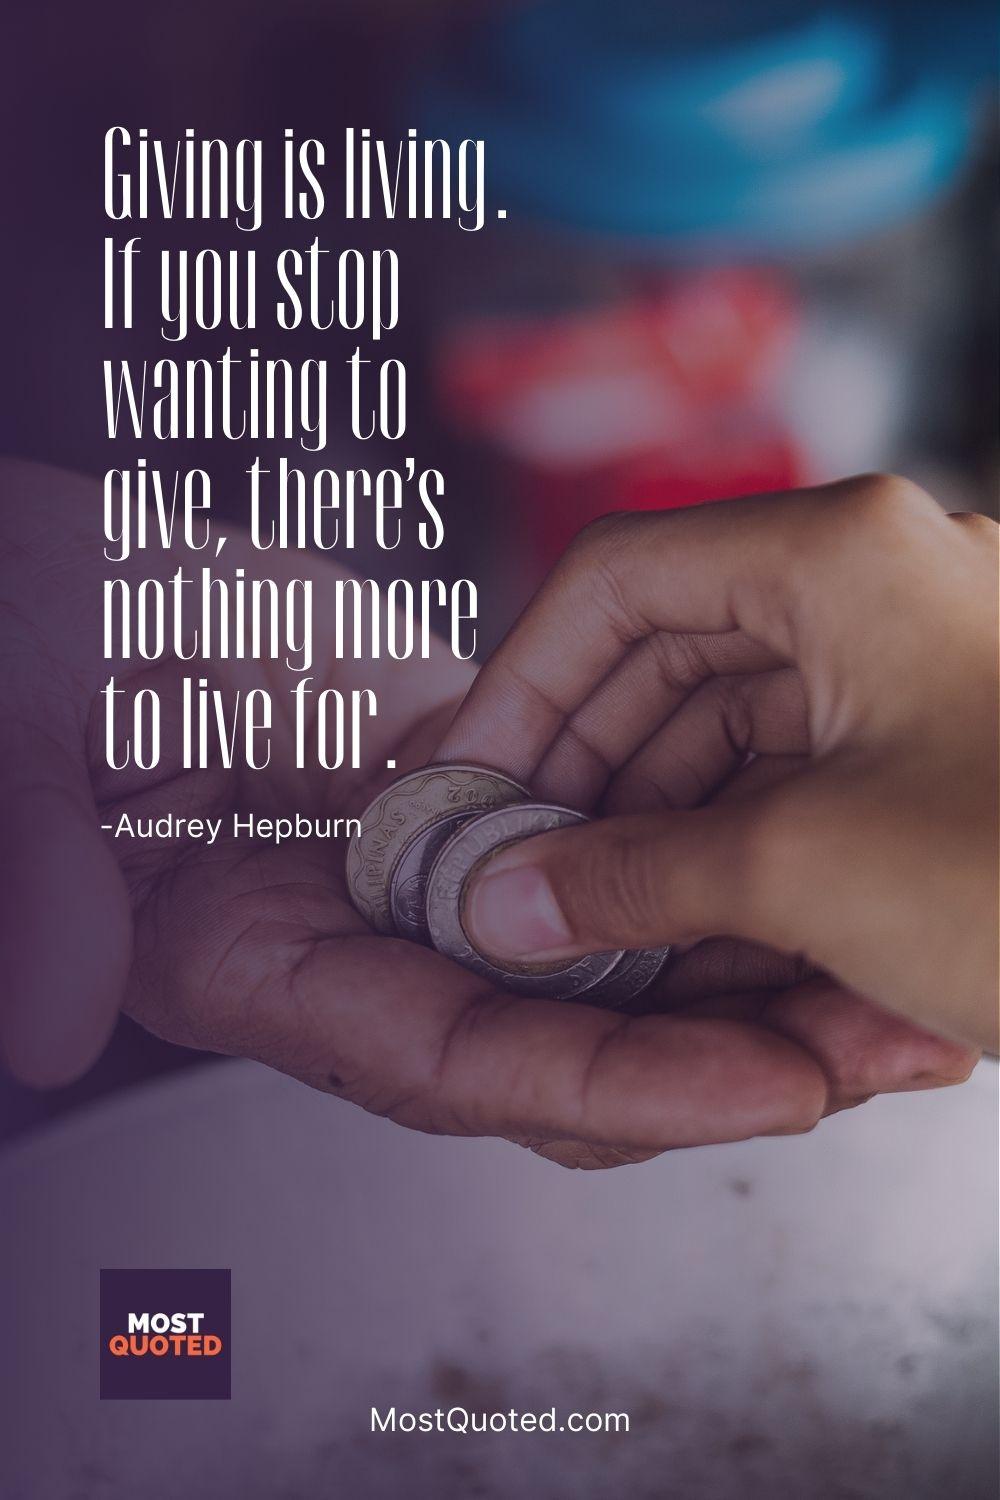 Giving is living. If you stop wanting to give, there’s nothing more to live for. - Audrey Hepburn